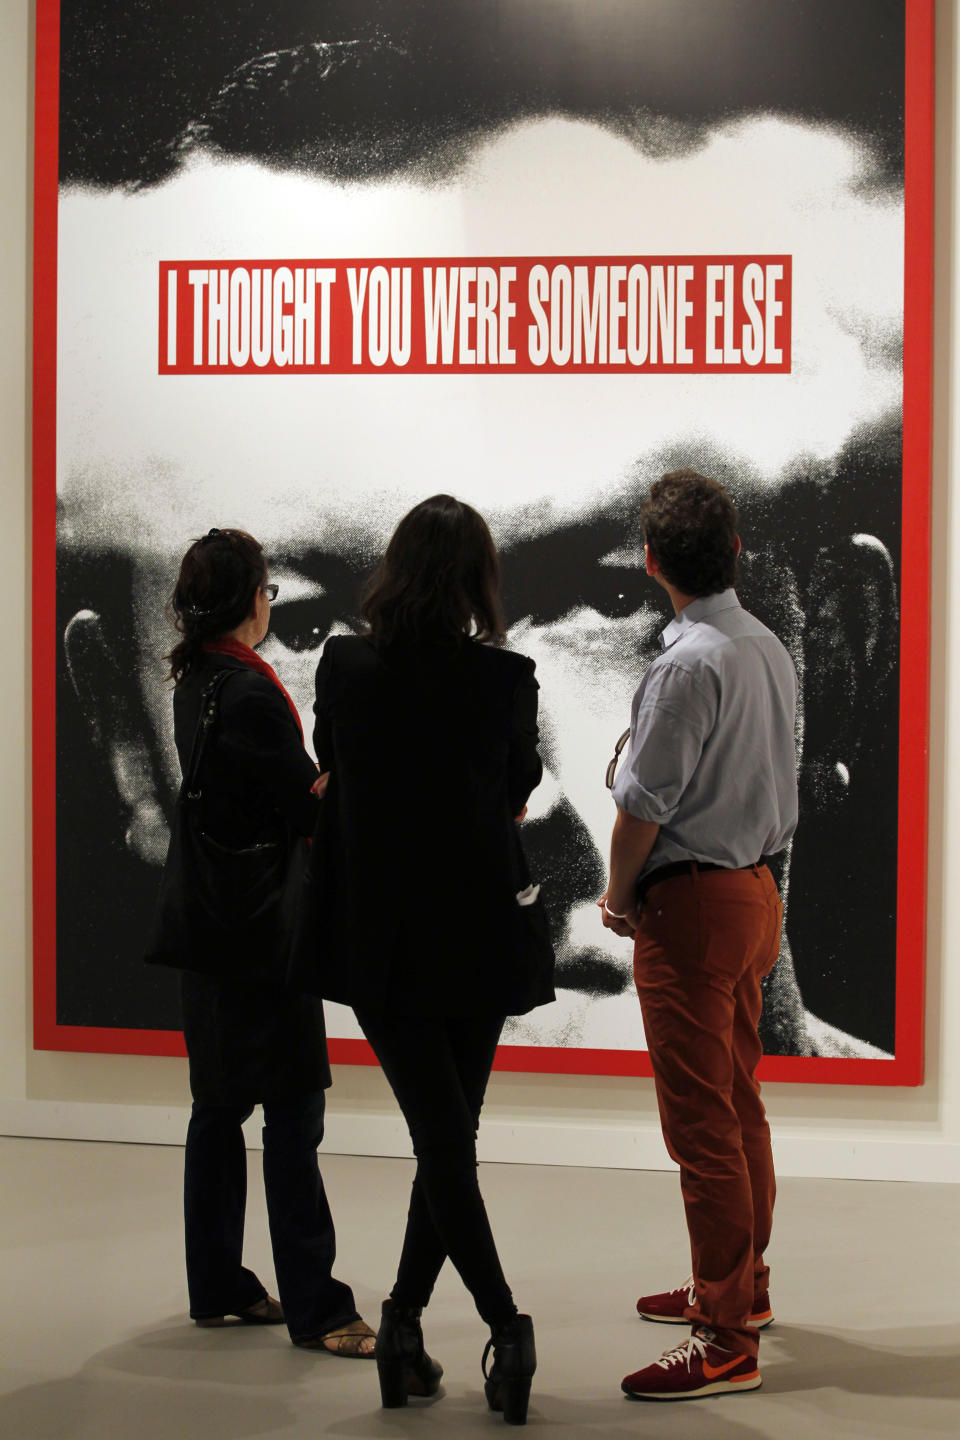 FILE - This Dec. 5, 2012 file photo shows a group of people look at a large work by Barbara Kruger "Untitled (I Thought You Were Someone Else)" on display as part of Art Basel Miami Beach in Miami Beach, Fla. The 2013 Art Basel Miami Beach takes place Dec. 5-8. (AP Photo/Wilfredo Lee, File)